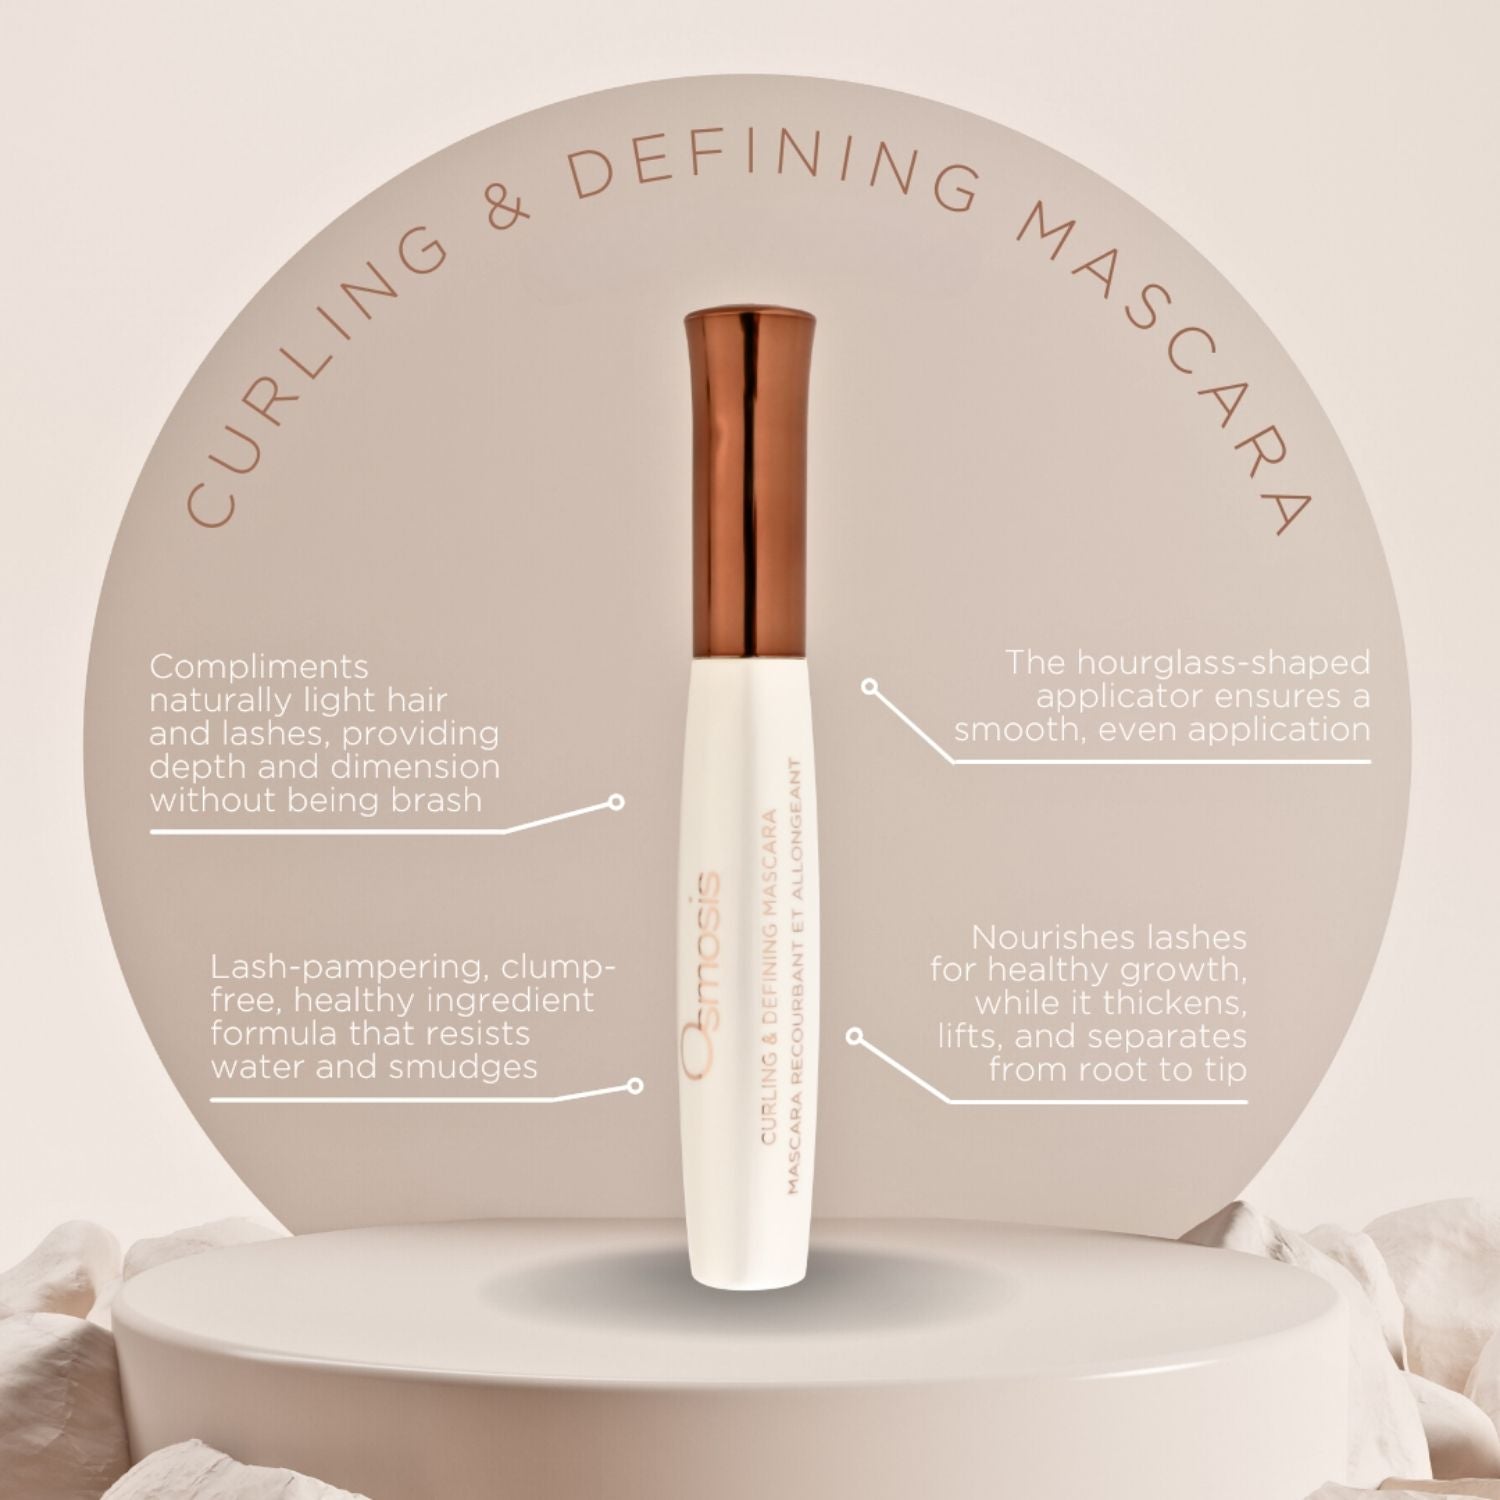 curling and defining mascara with an infograph about benefits